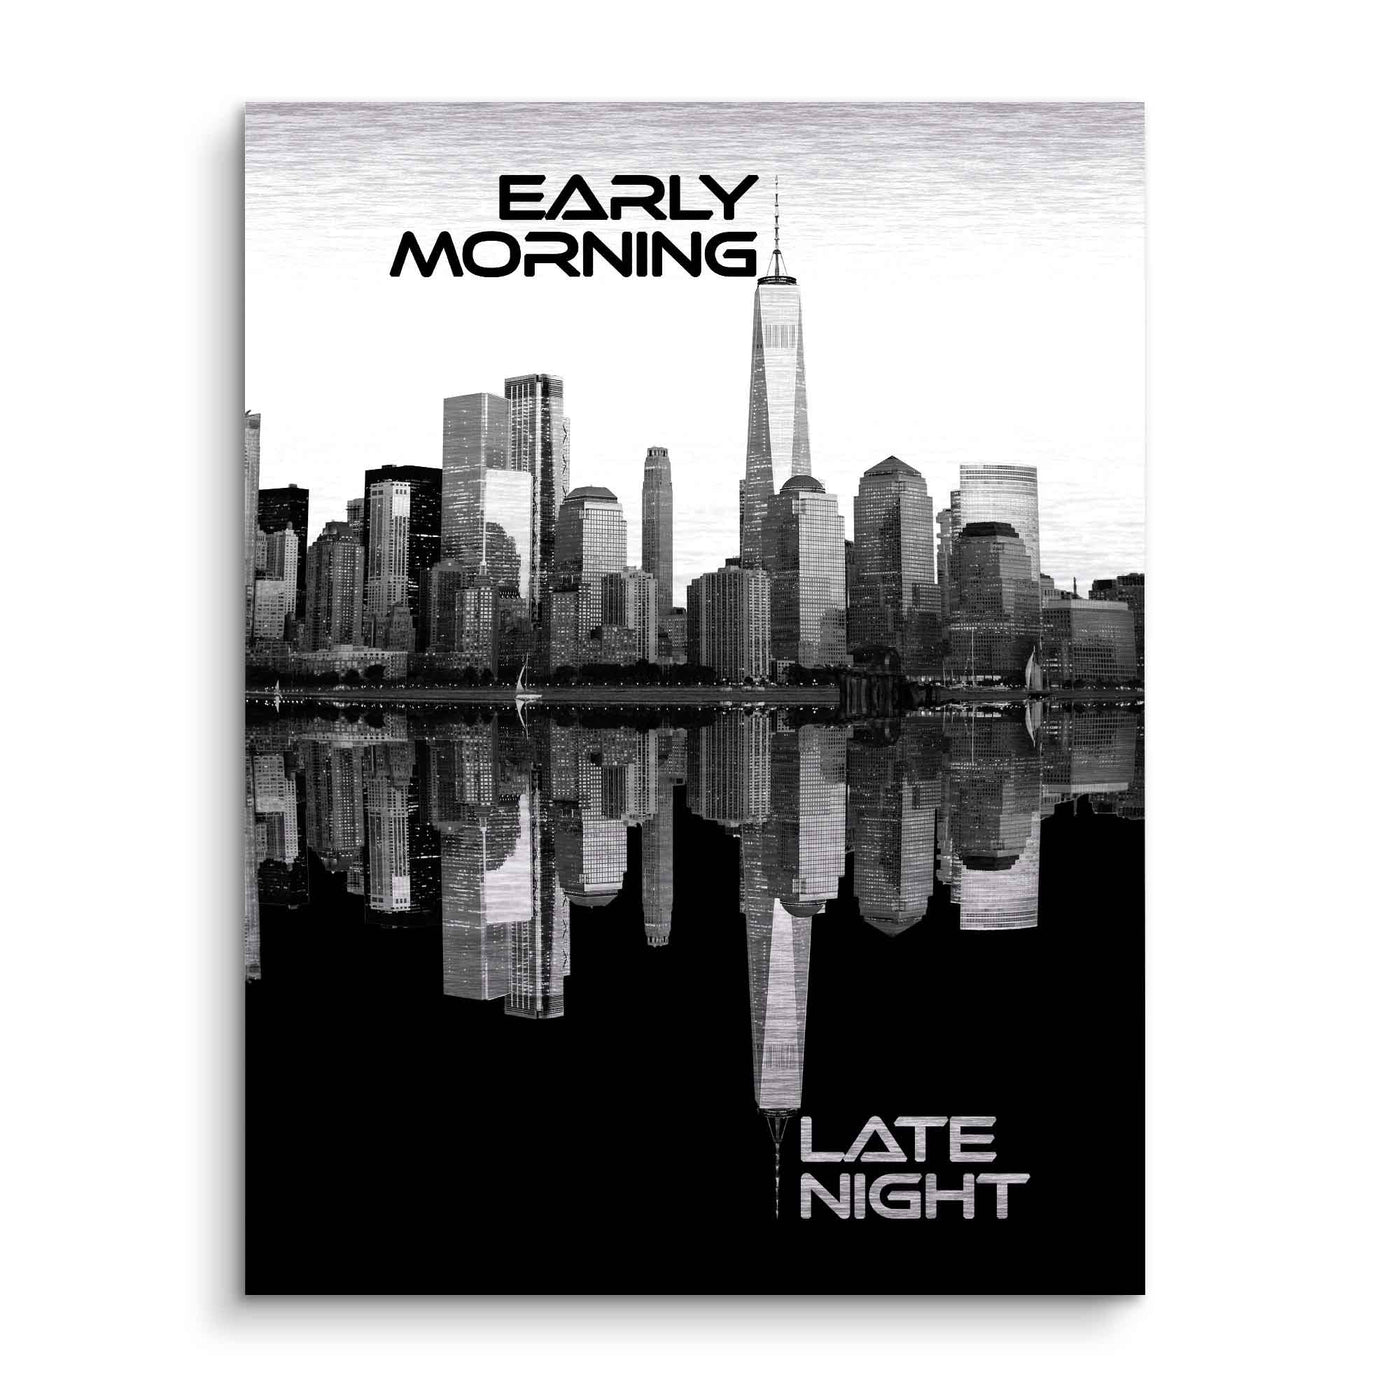 Early morning - late night